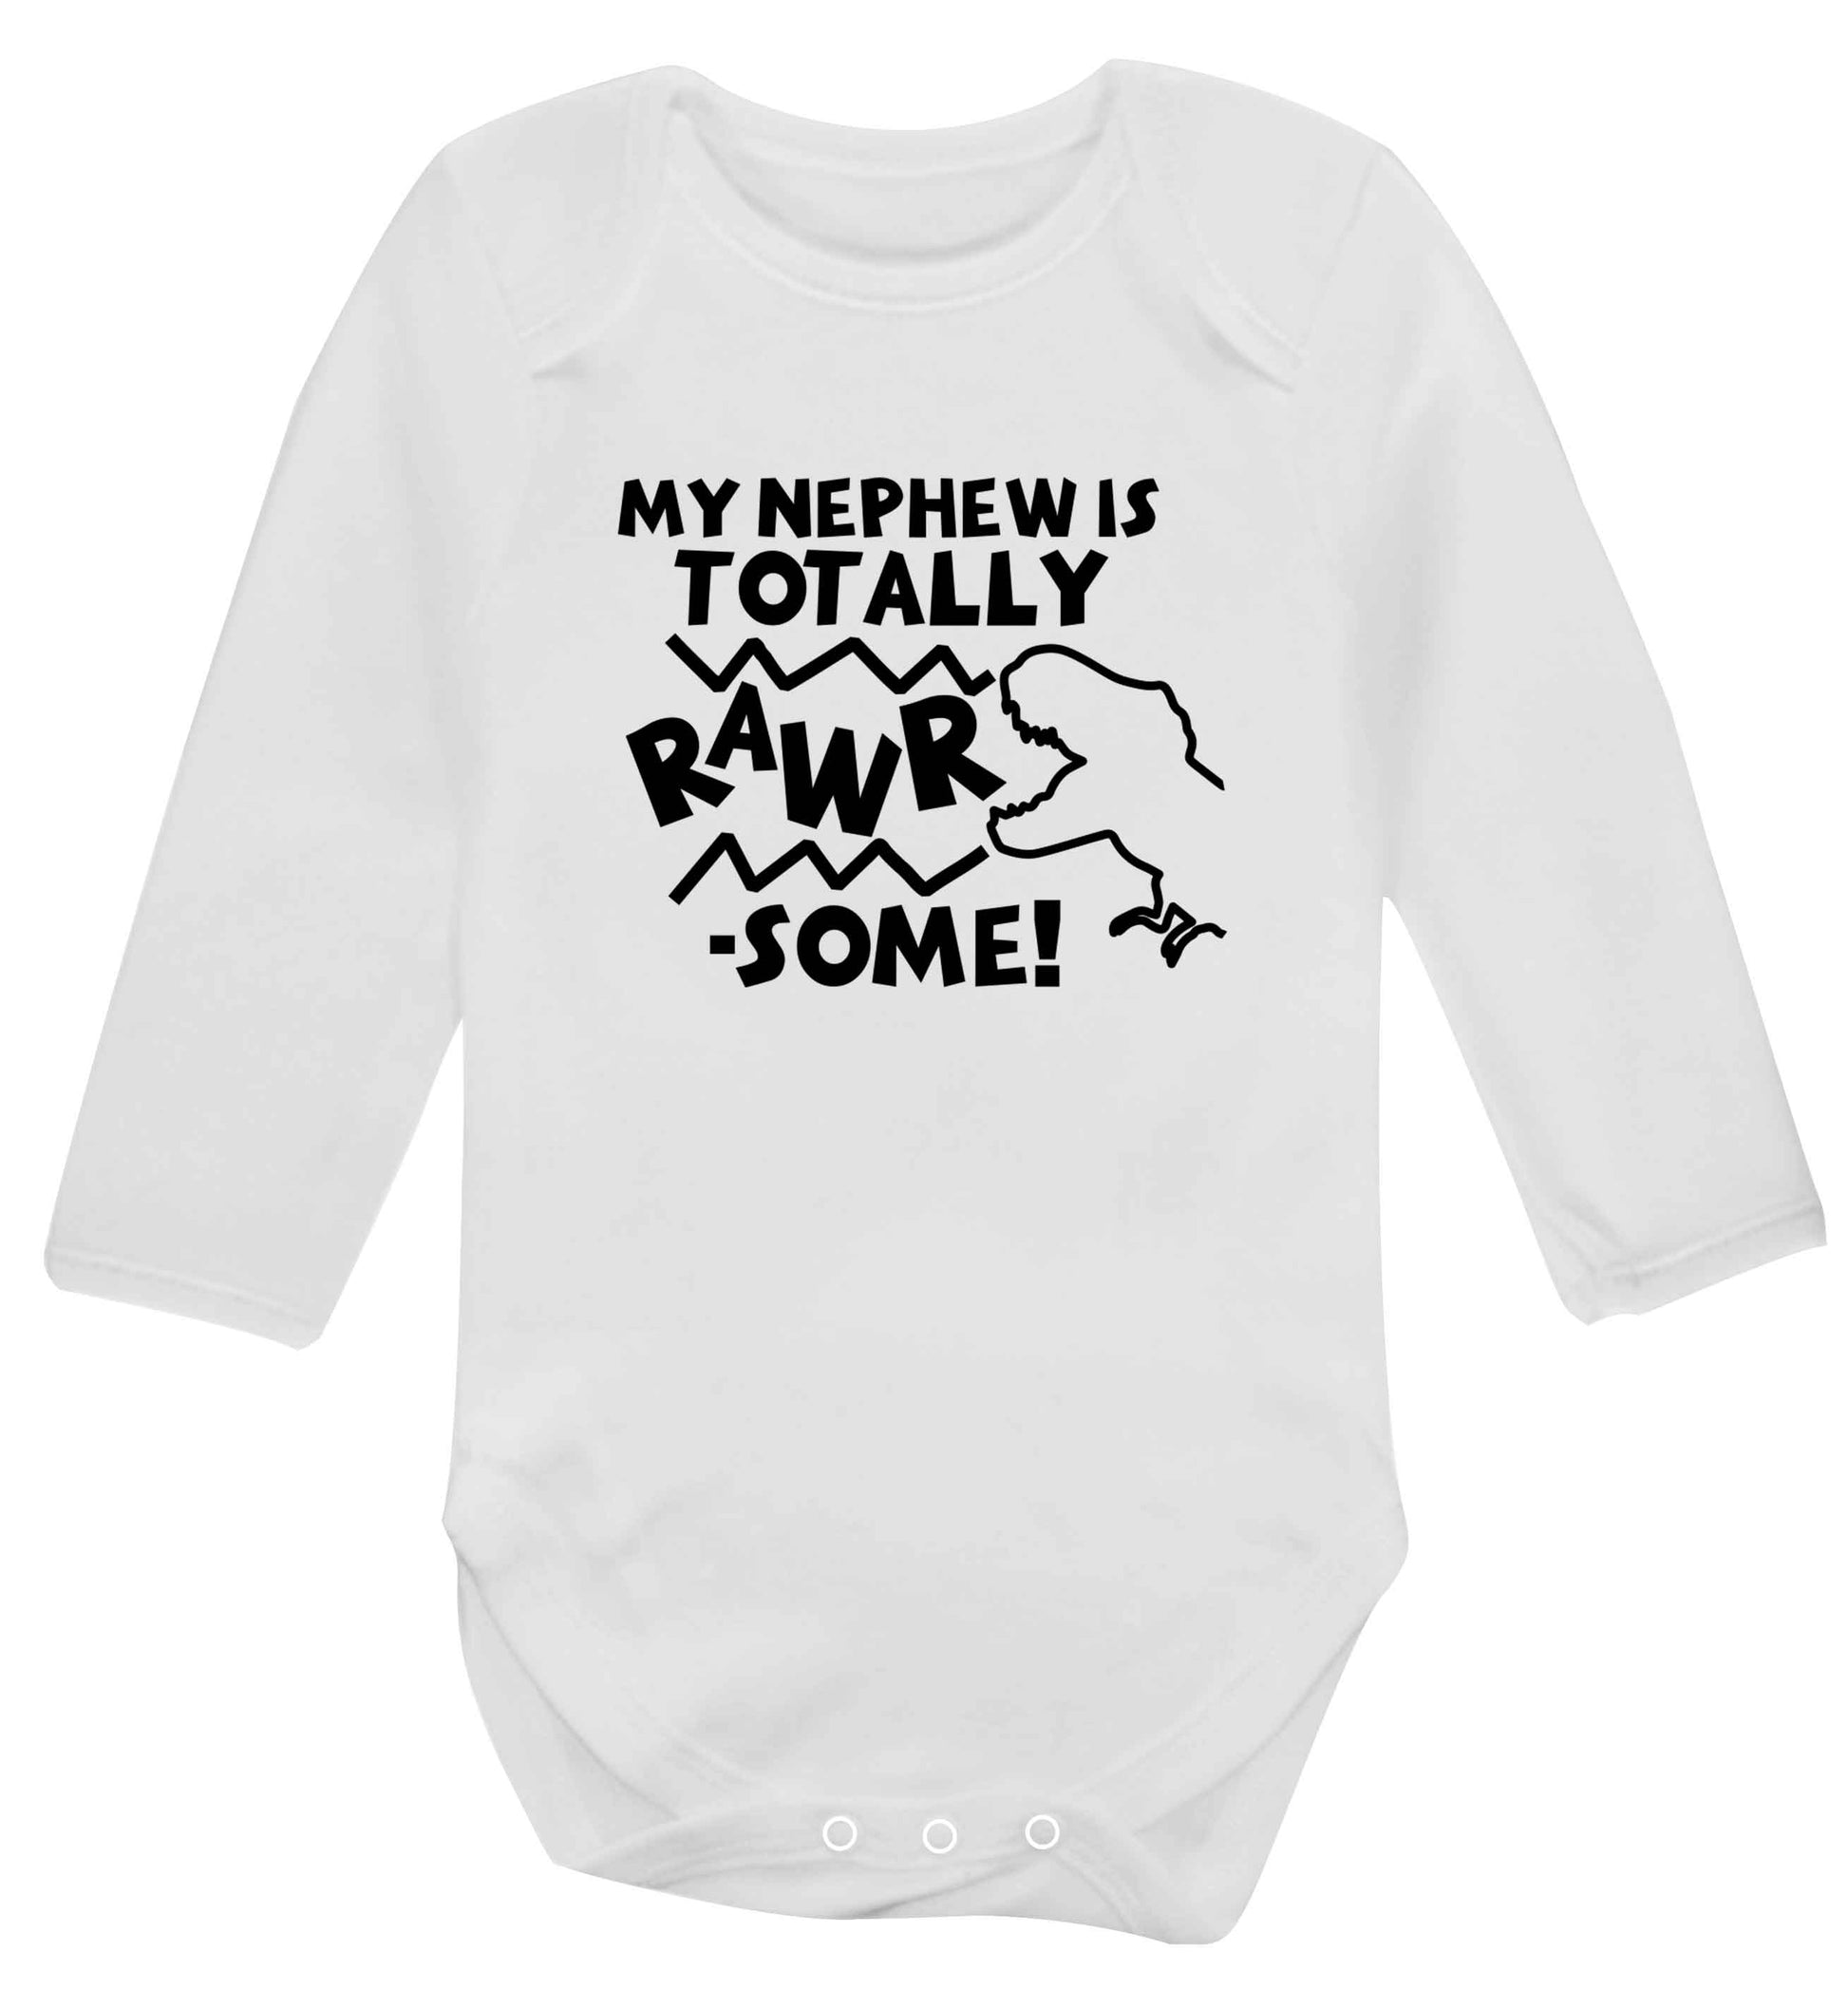 My nephew is totally rawrsome baby vest long sleeved white 6-12 months